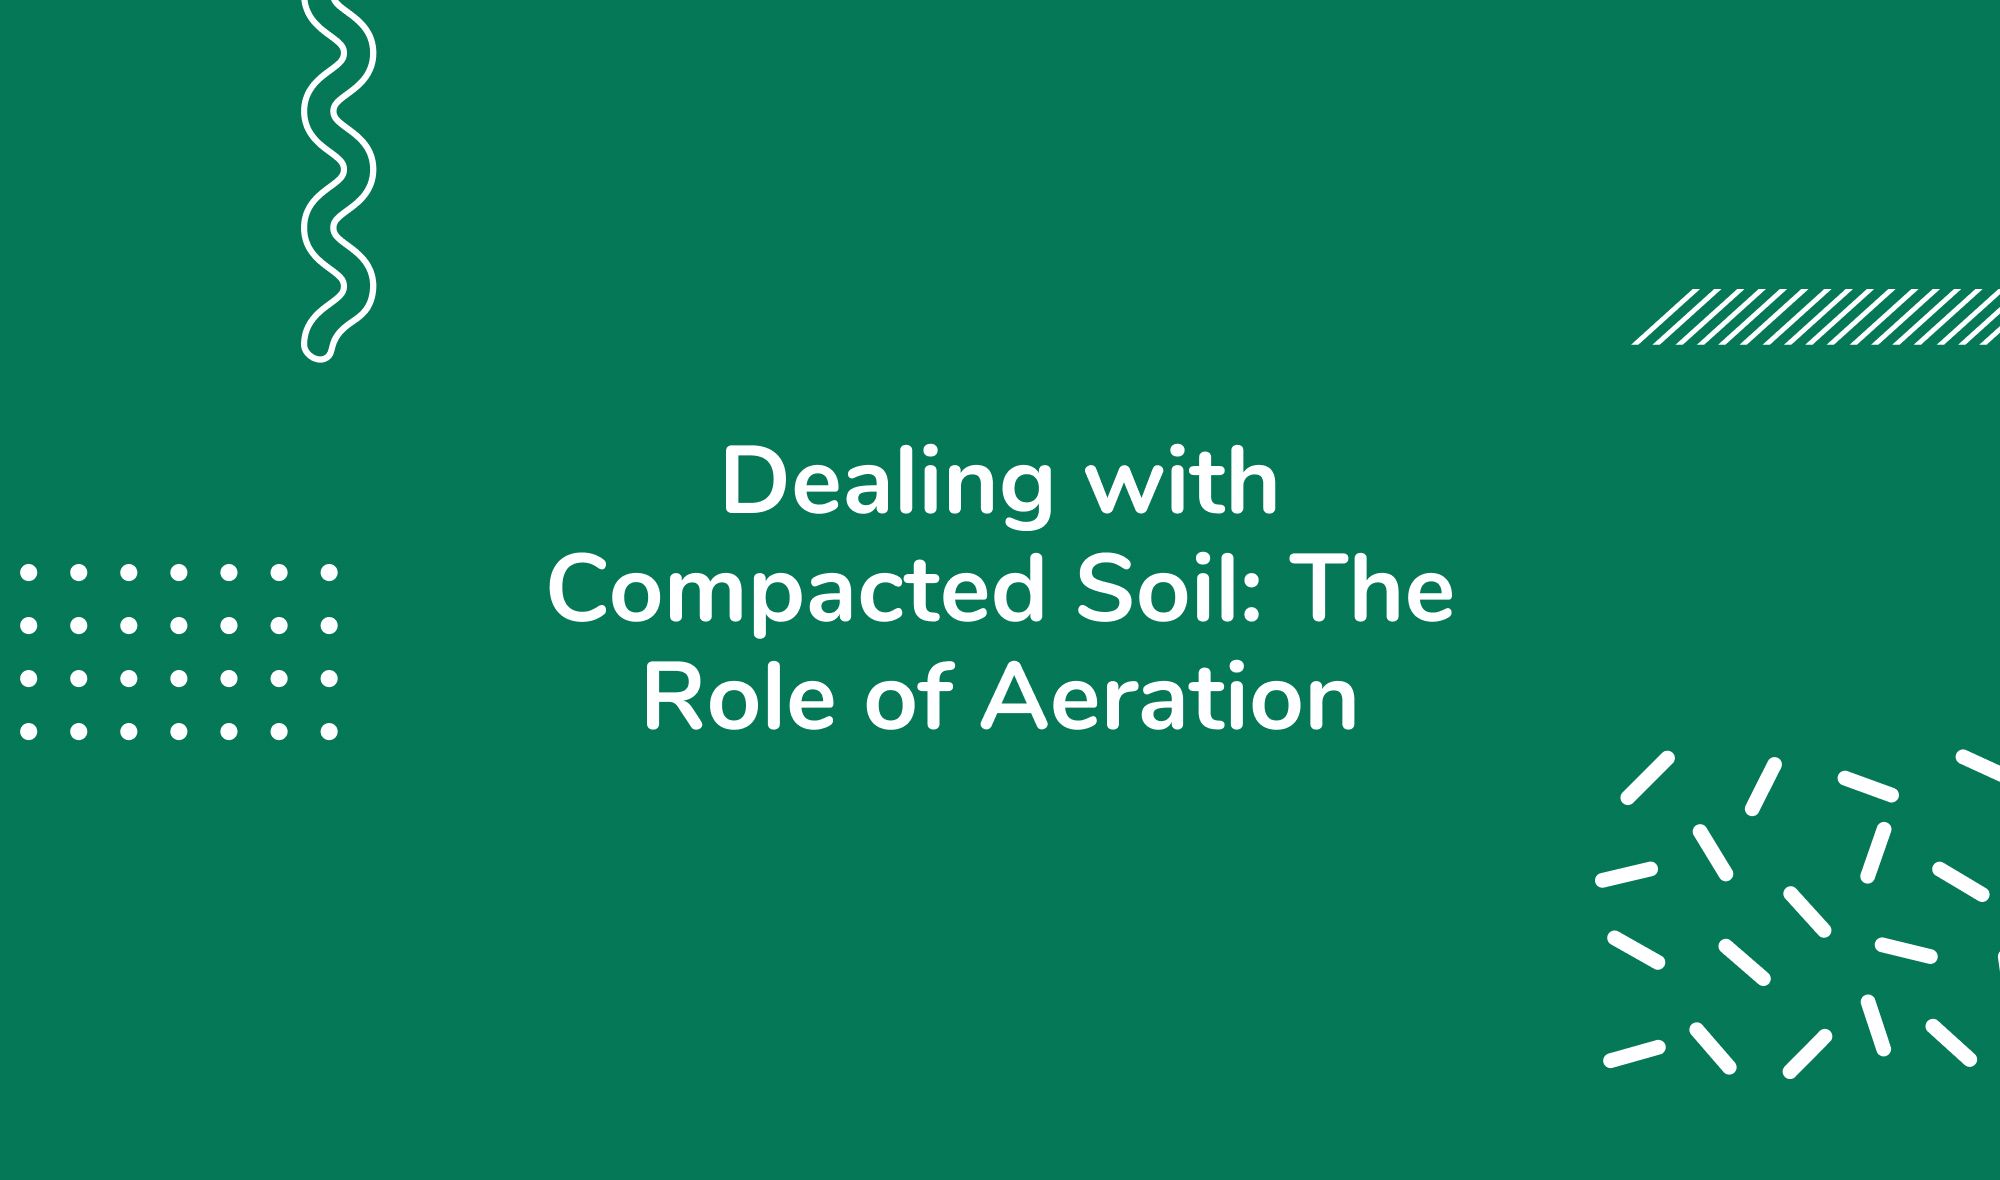 Dealing with Compacted Soil: The Role of Aeration